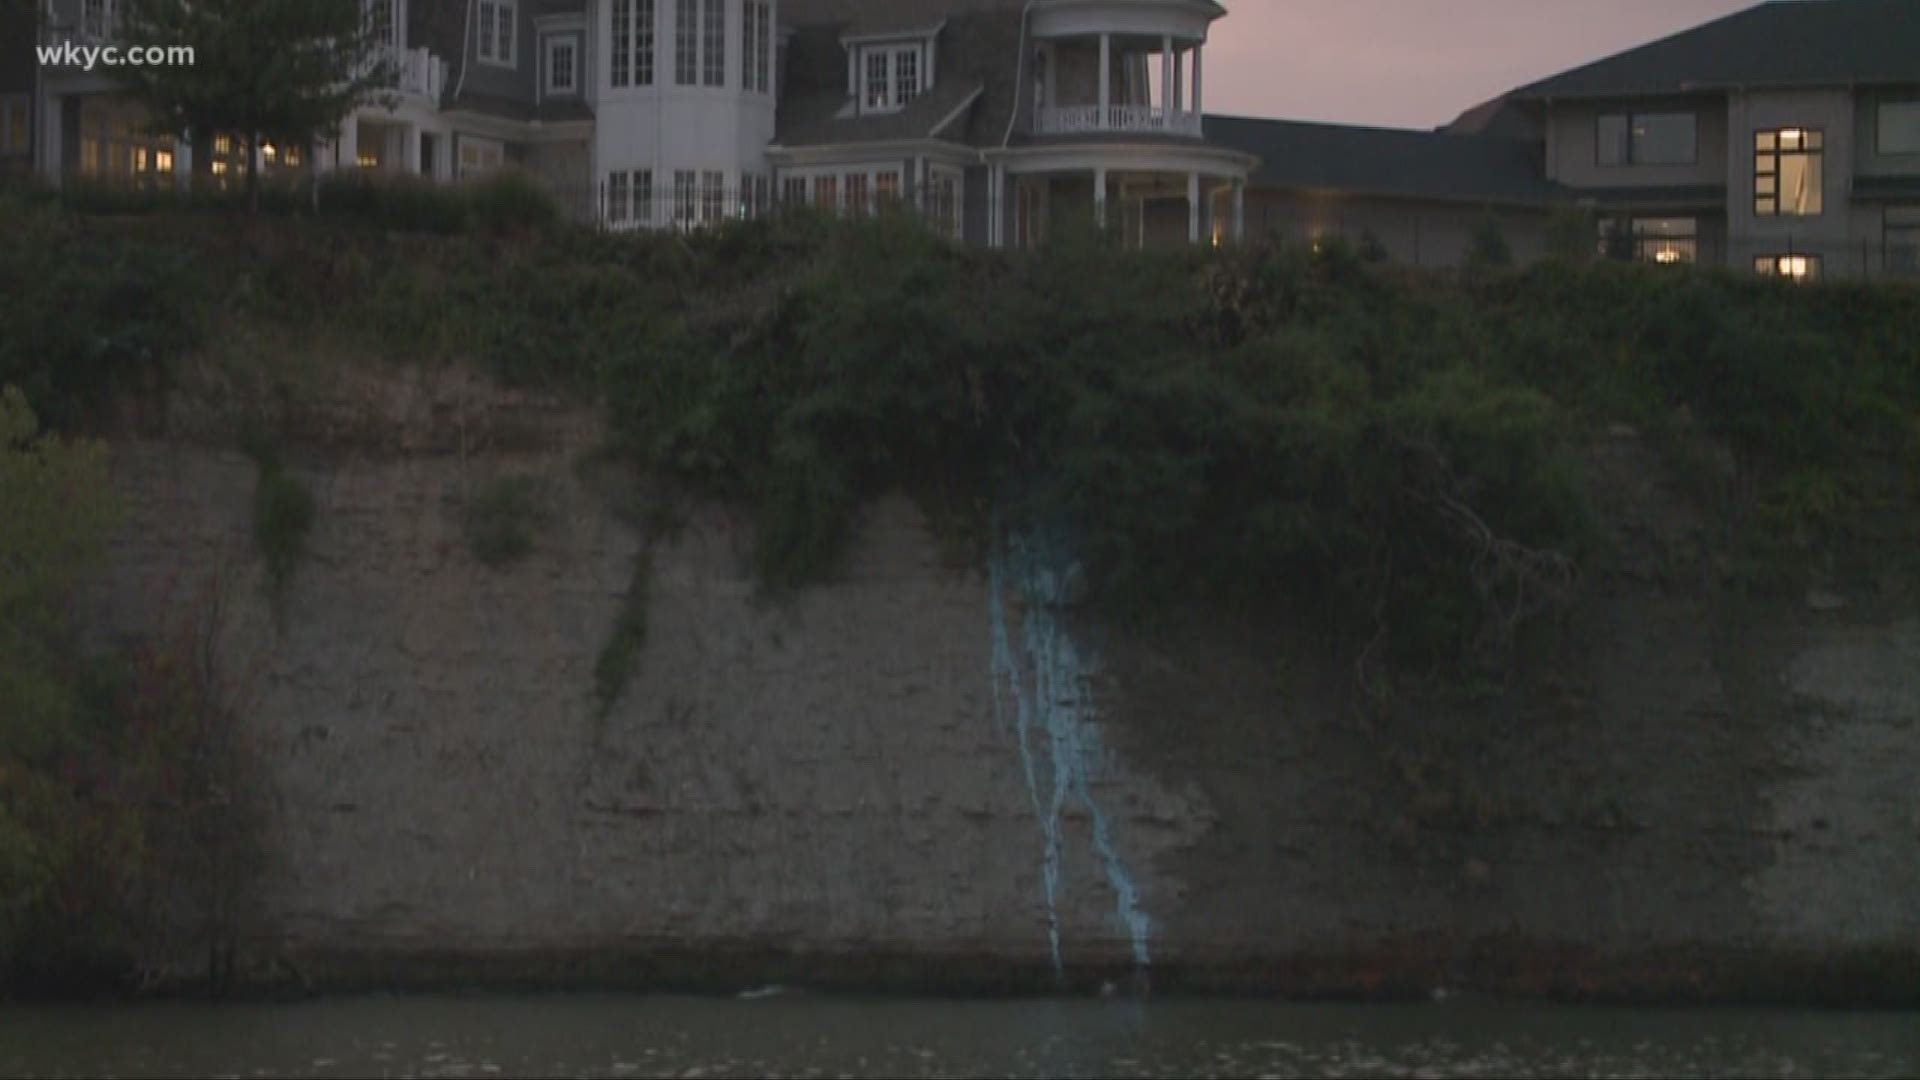 WKYC's Dorsena Drakeford reports on a man who was arrested in Rocky River who was arrested after allegedly dumping blue paint over a cliff.